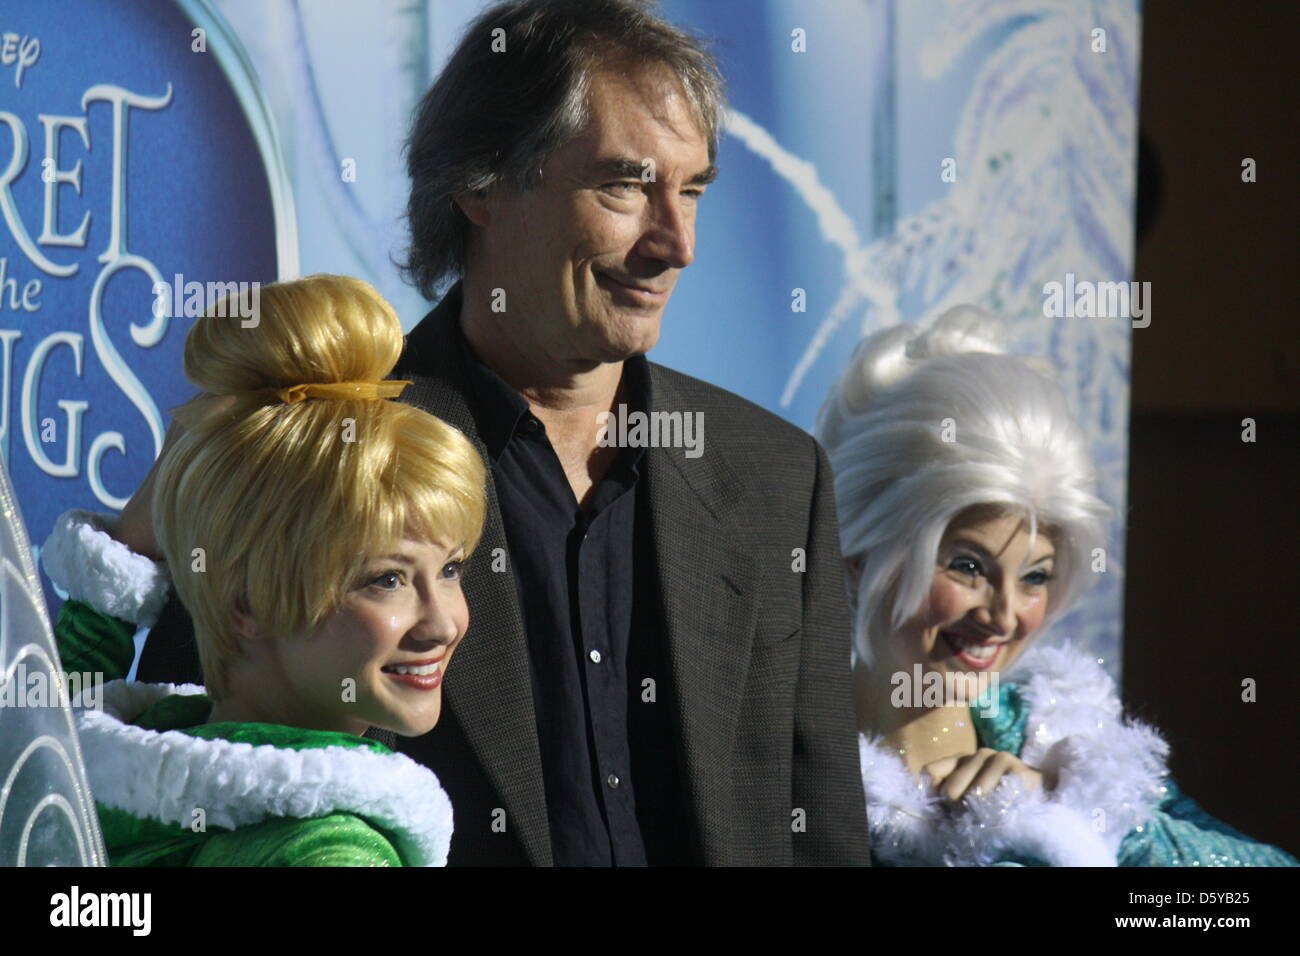 British actor Timothy Dalton poses with two actresses dressed as fairies at the premiere of the Walt Disney movie 'Secret of the Wings' in New York, USA, 20 October 2012. Photo: Christina Horsten Stock Photo